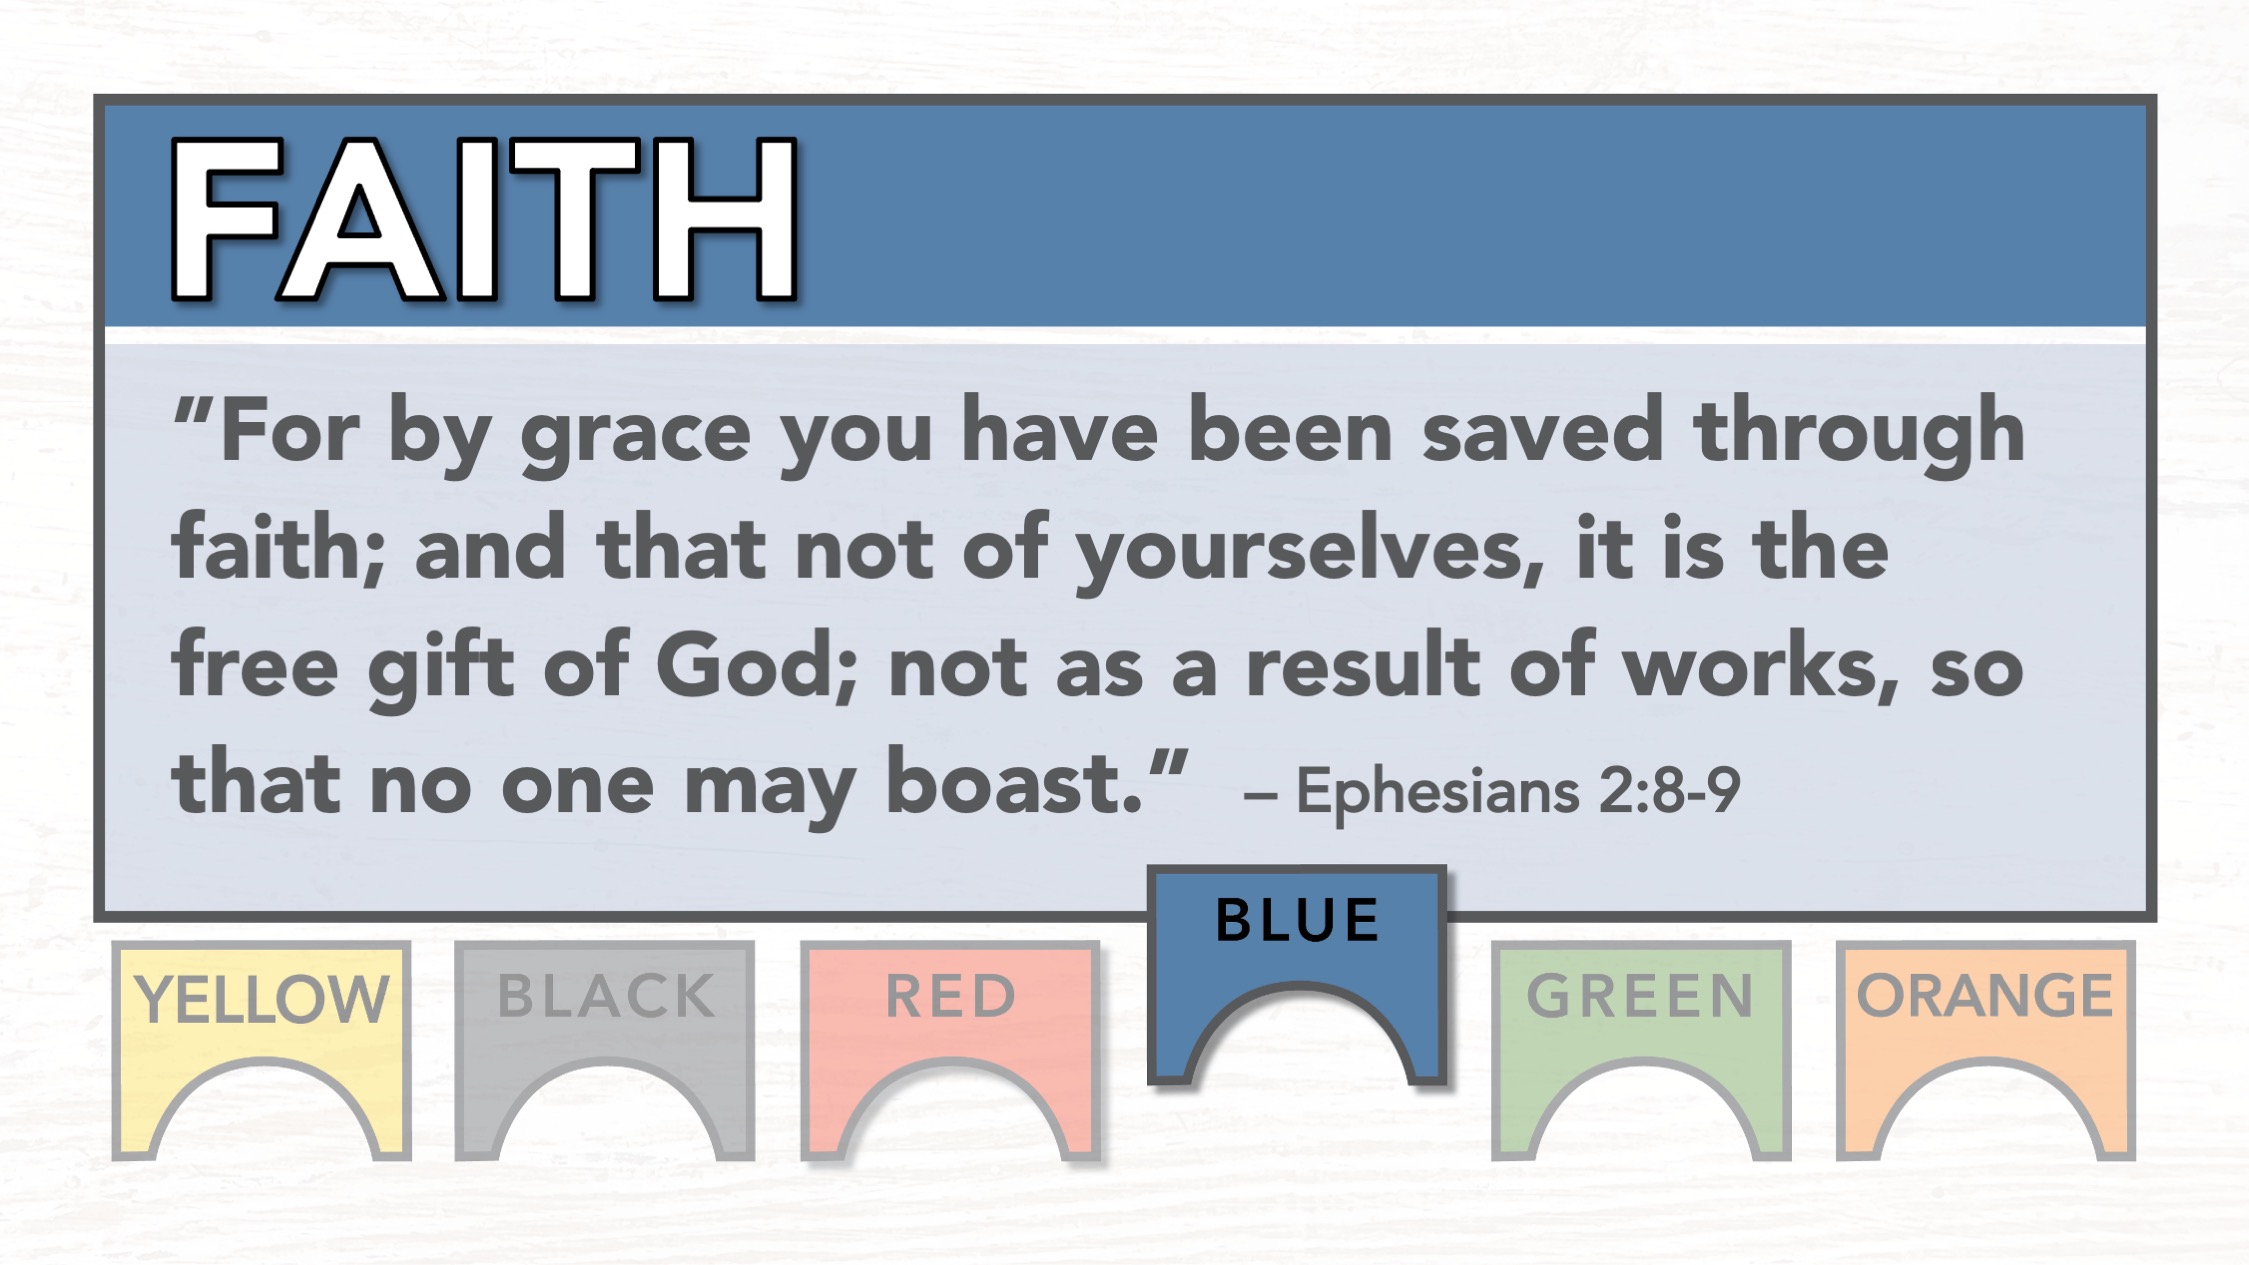 Blue - Faith: "For by grace you have been saved through faith; and that not of yourselves, it is the free gift of God; not as a result of works, so that no one may boast." Ephesians 2:8-9